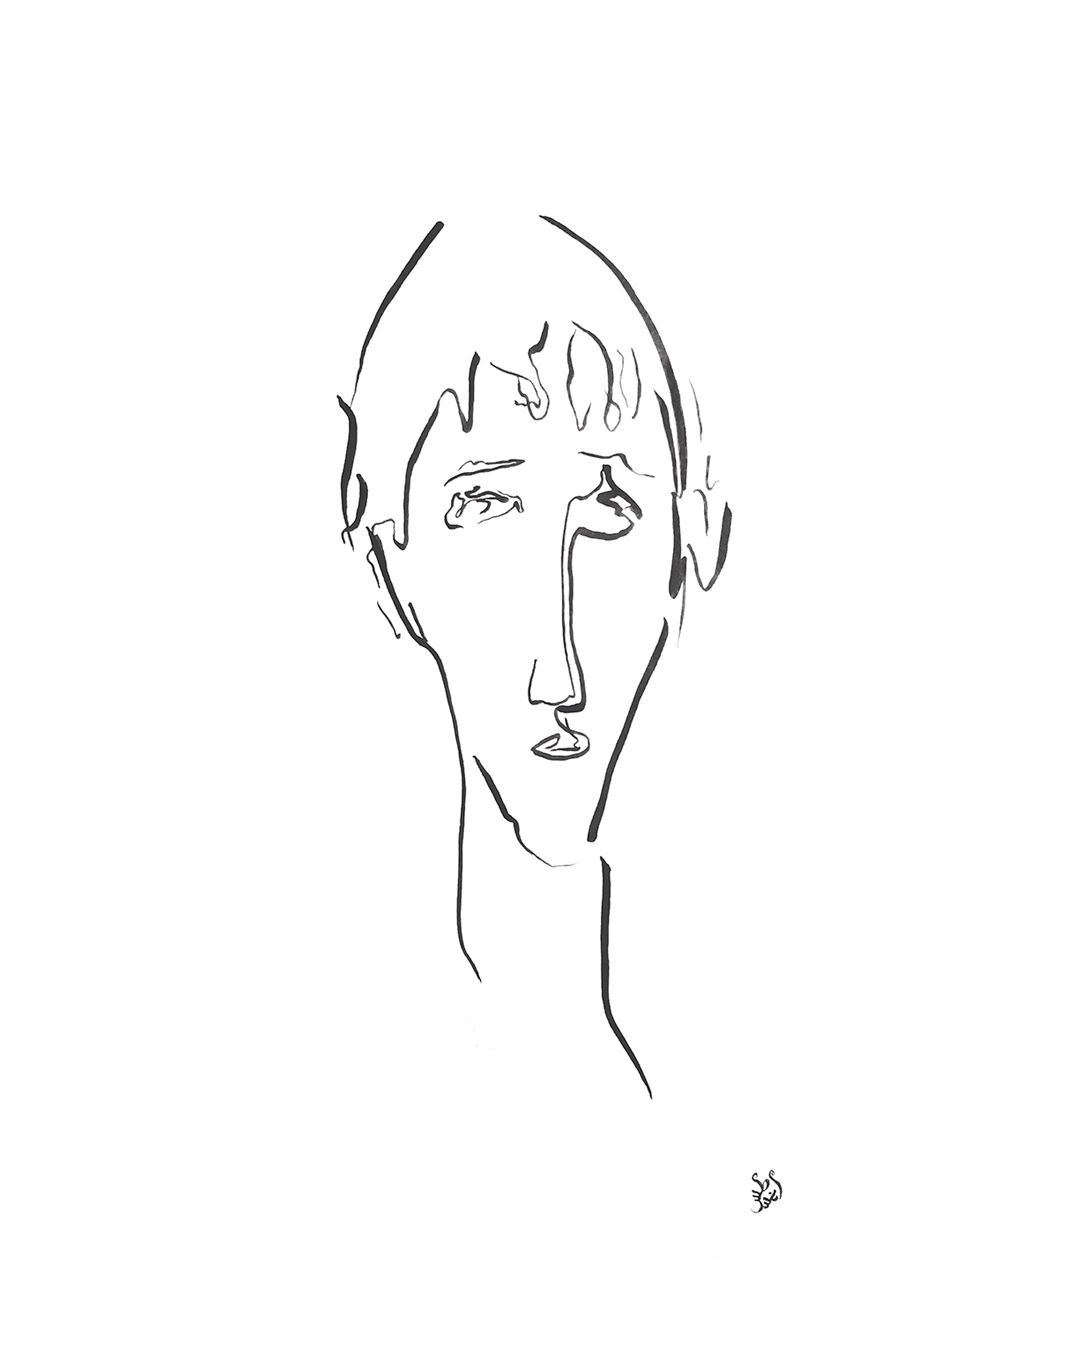 pen and ink line art drawing of a woman in the style of modigliani